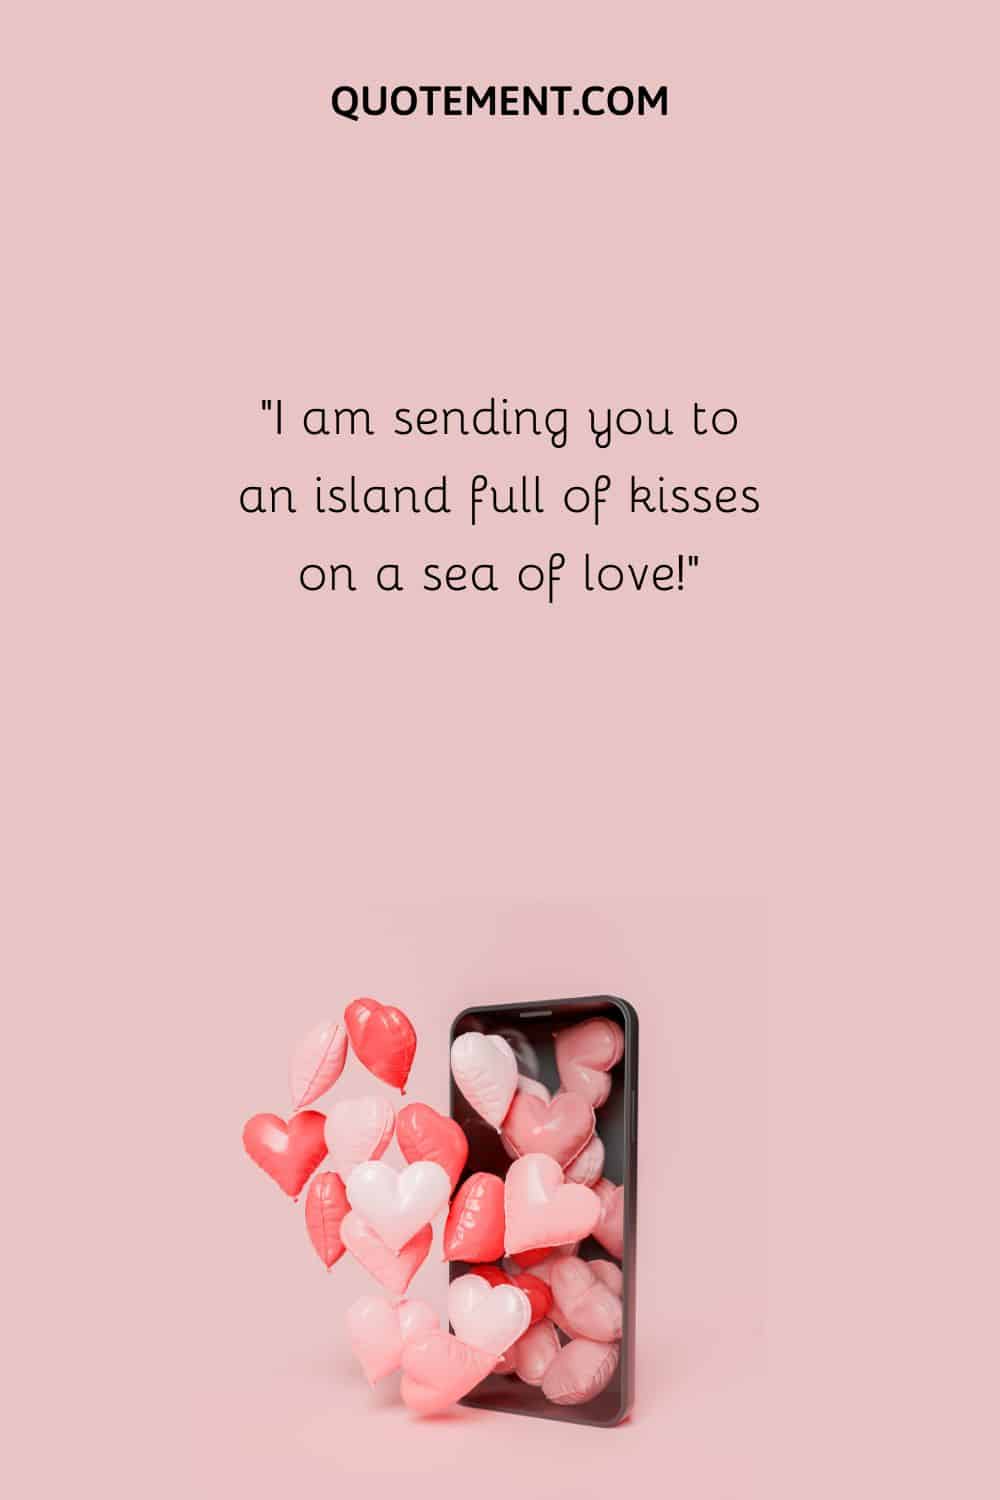 “I am sending you to an island full of kisses on a sea of love!”